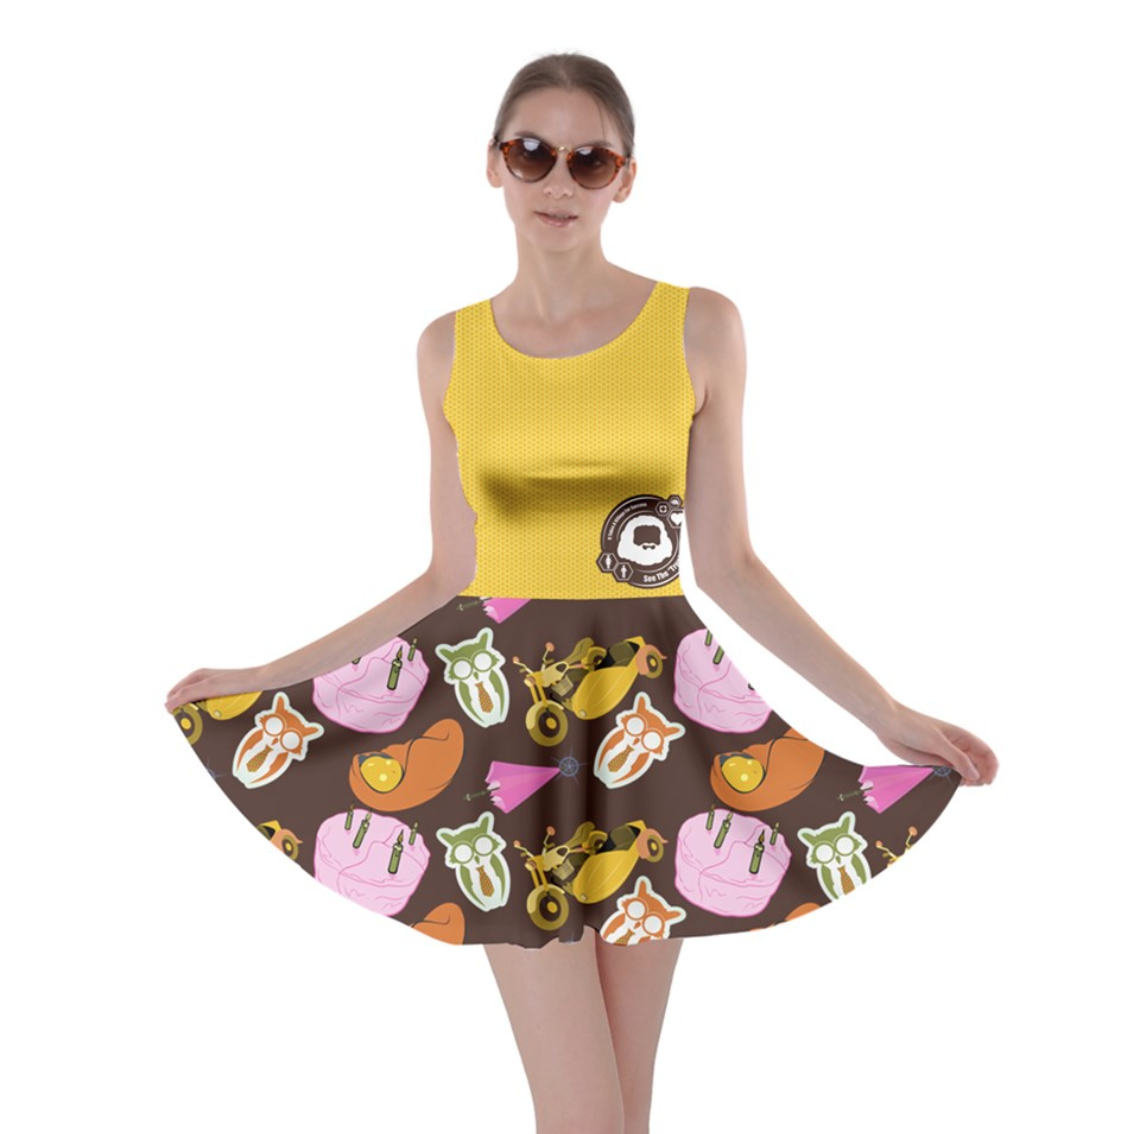 See The "TRUE" Child Skater Dress (yellow) - Inspired by Literary Character, Hagrid